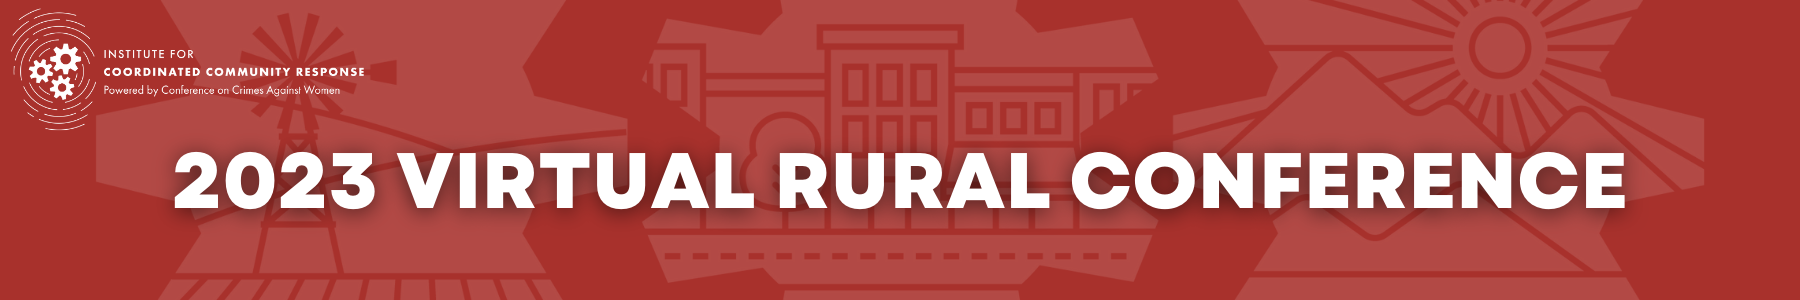 2023 Virtual Rural Conference